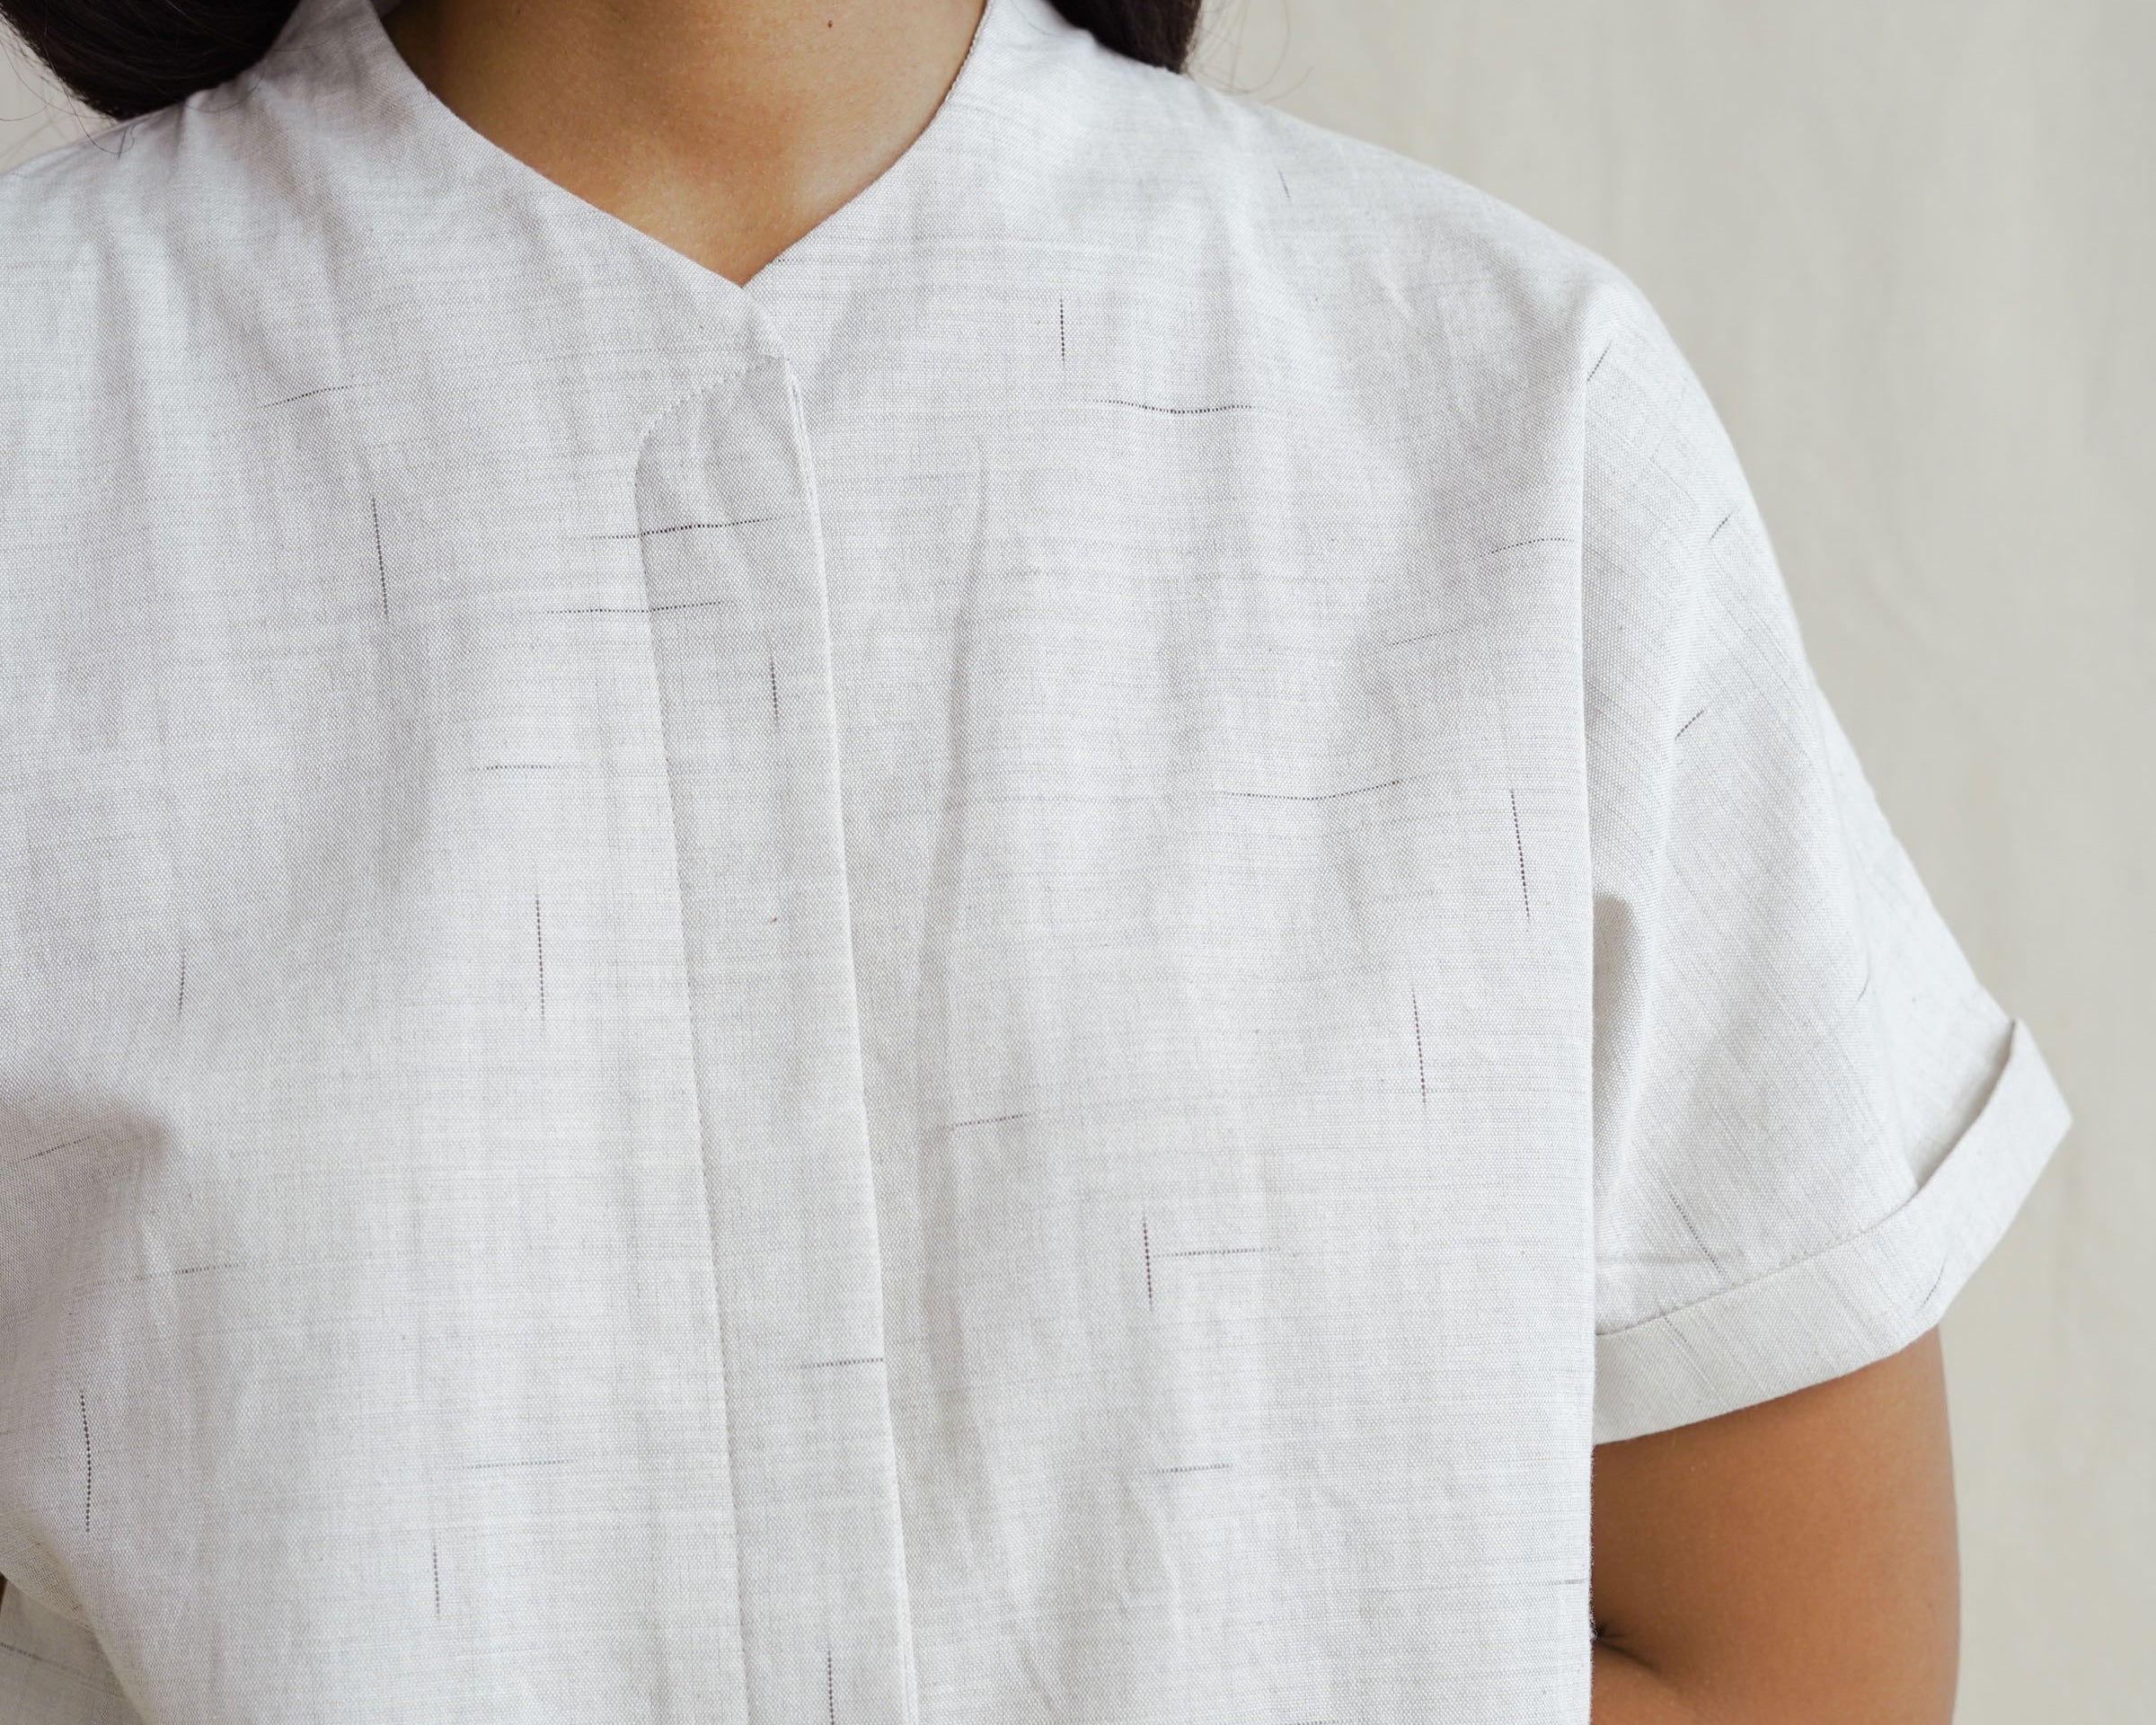 women's top, 100% raw cotton, handmade, handcrafted, slow fashion, sustainable fashion